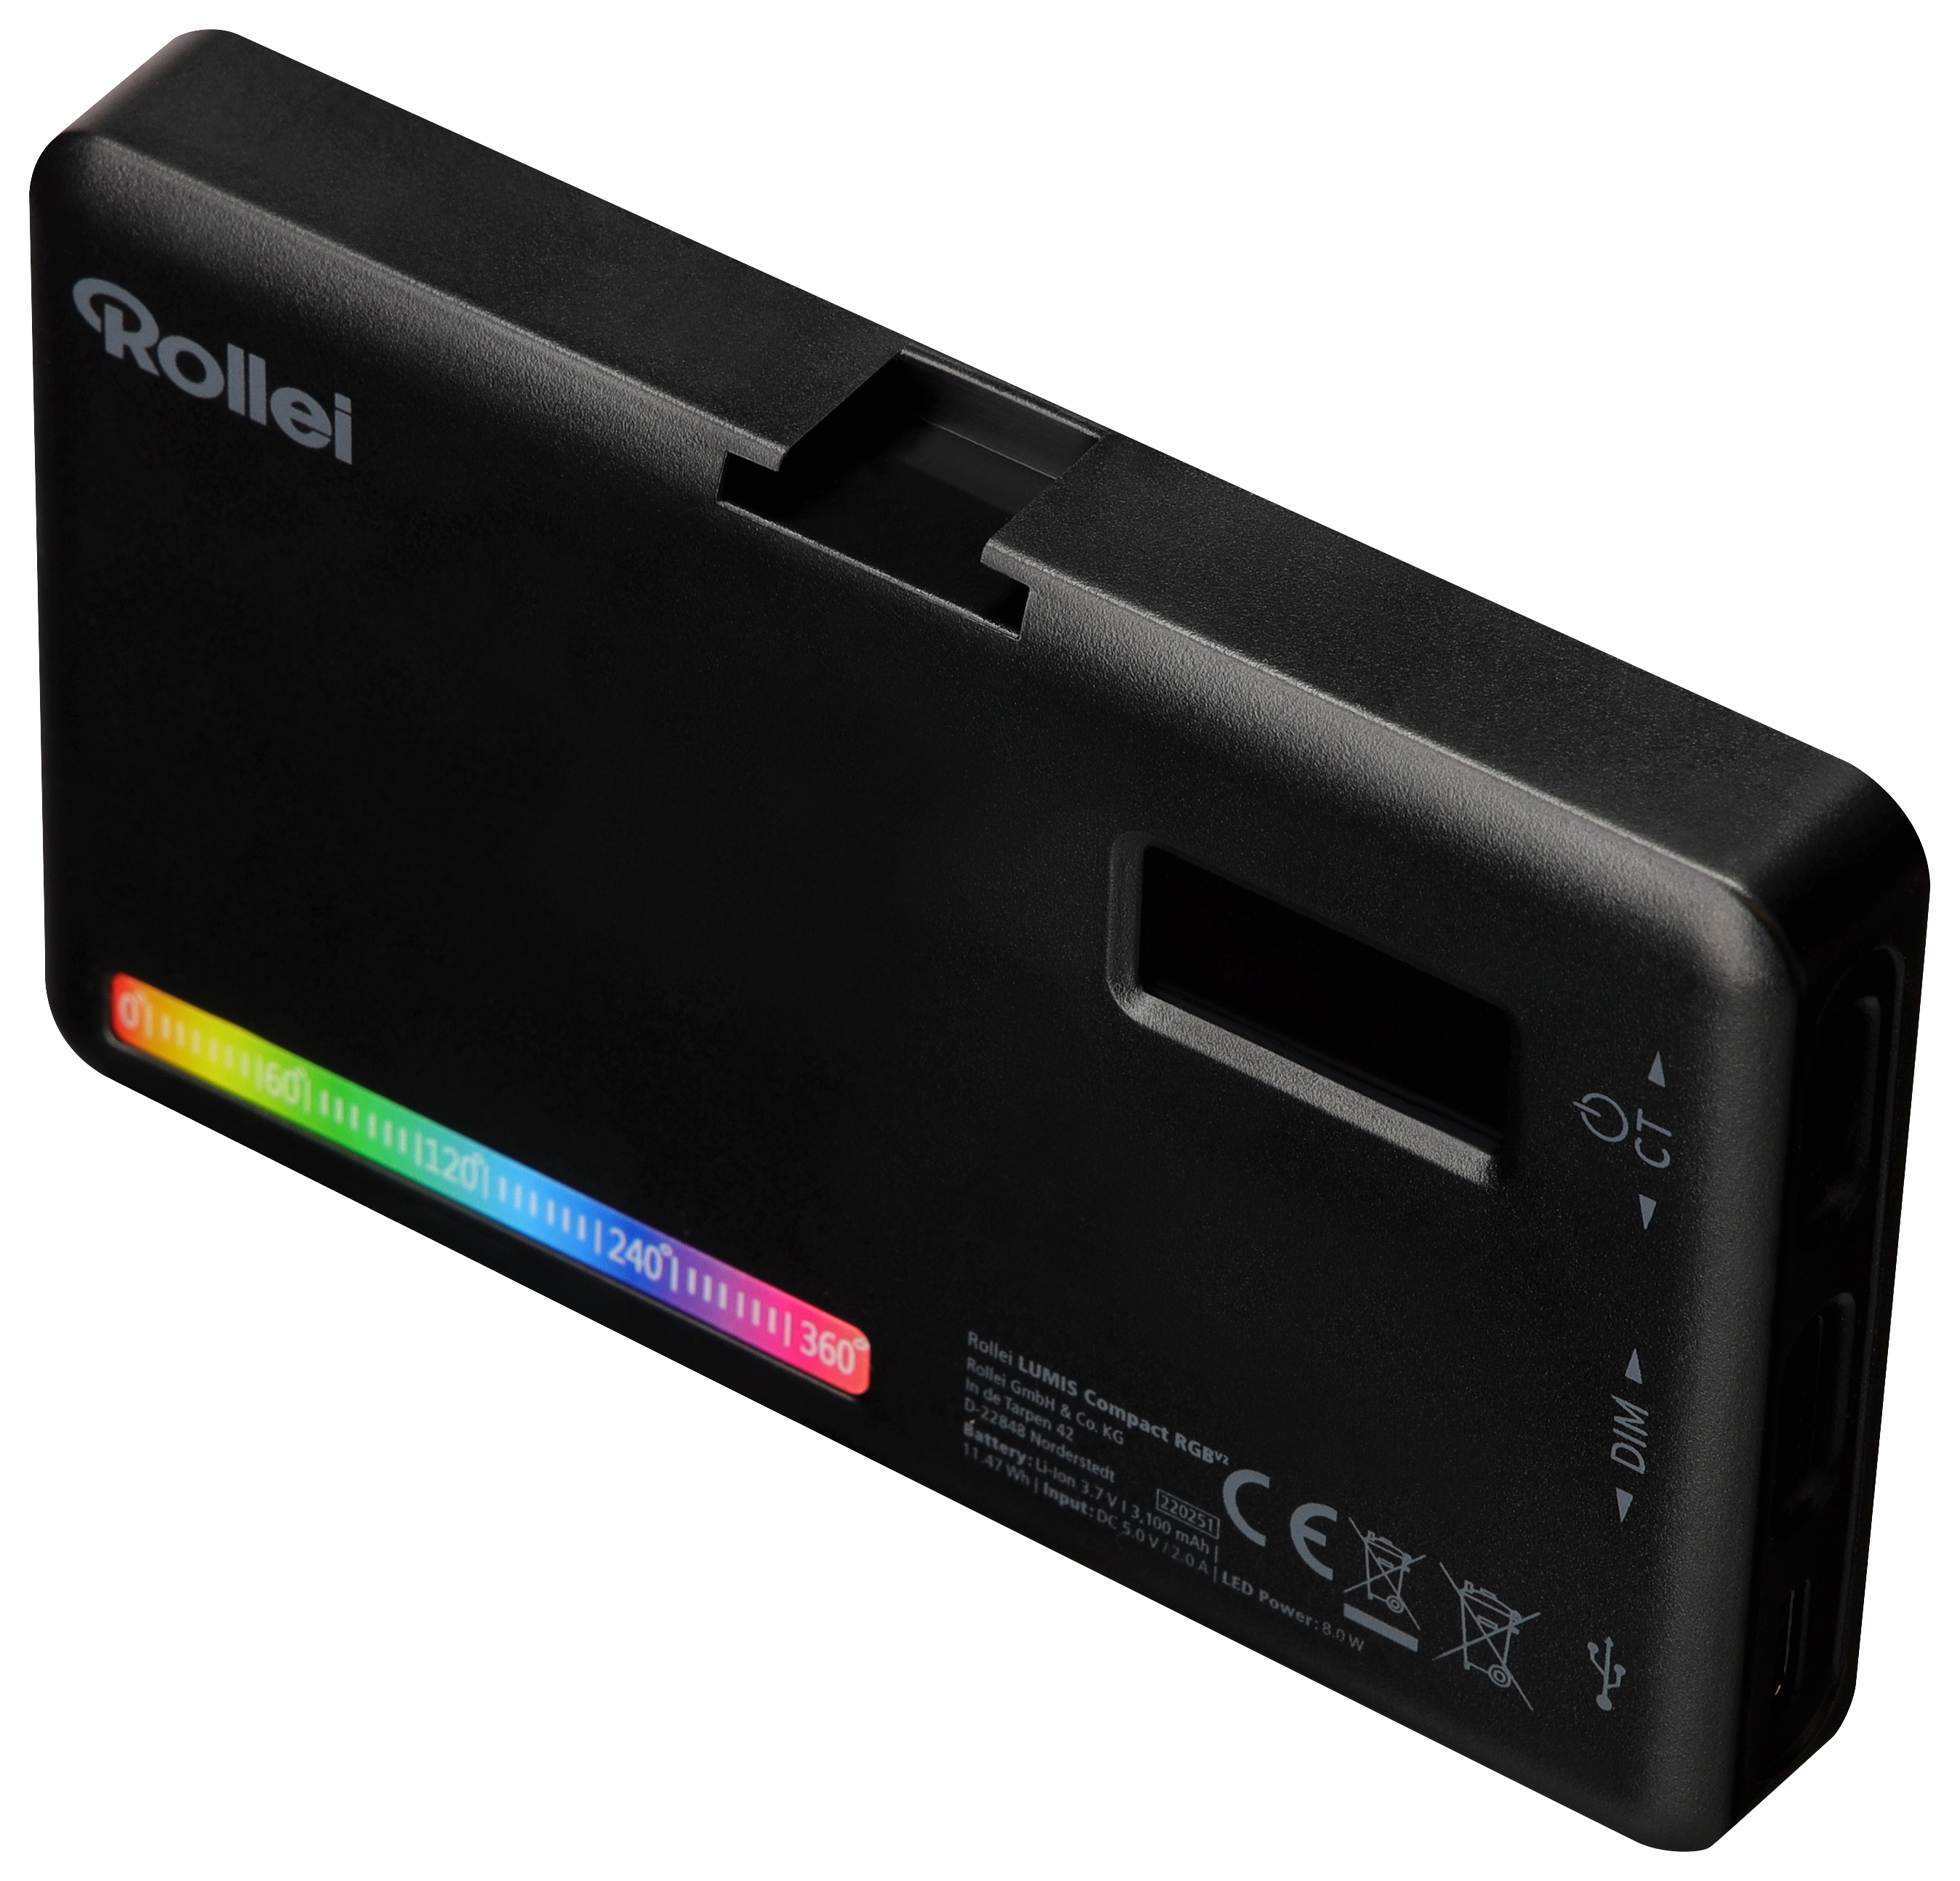 ROLLEI LUMIS Compact RGB LED-Licht